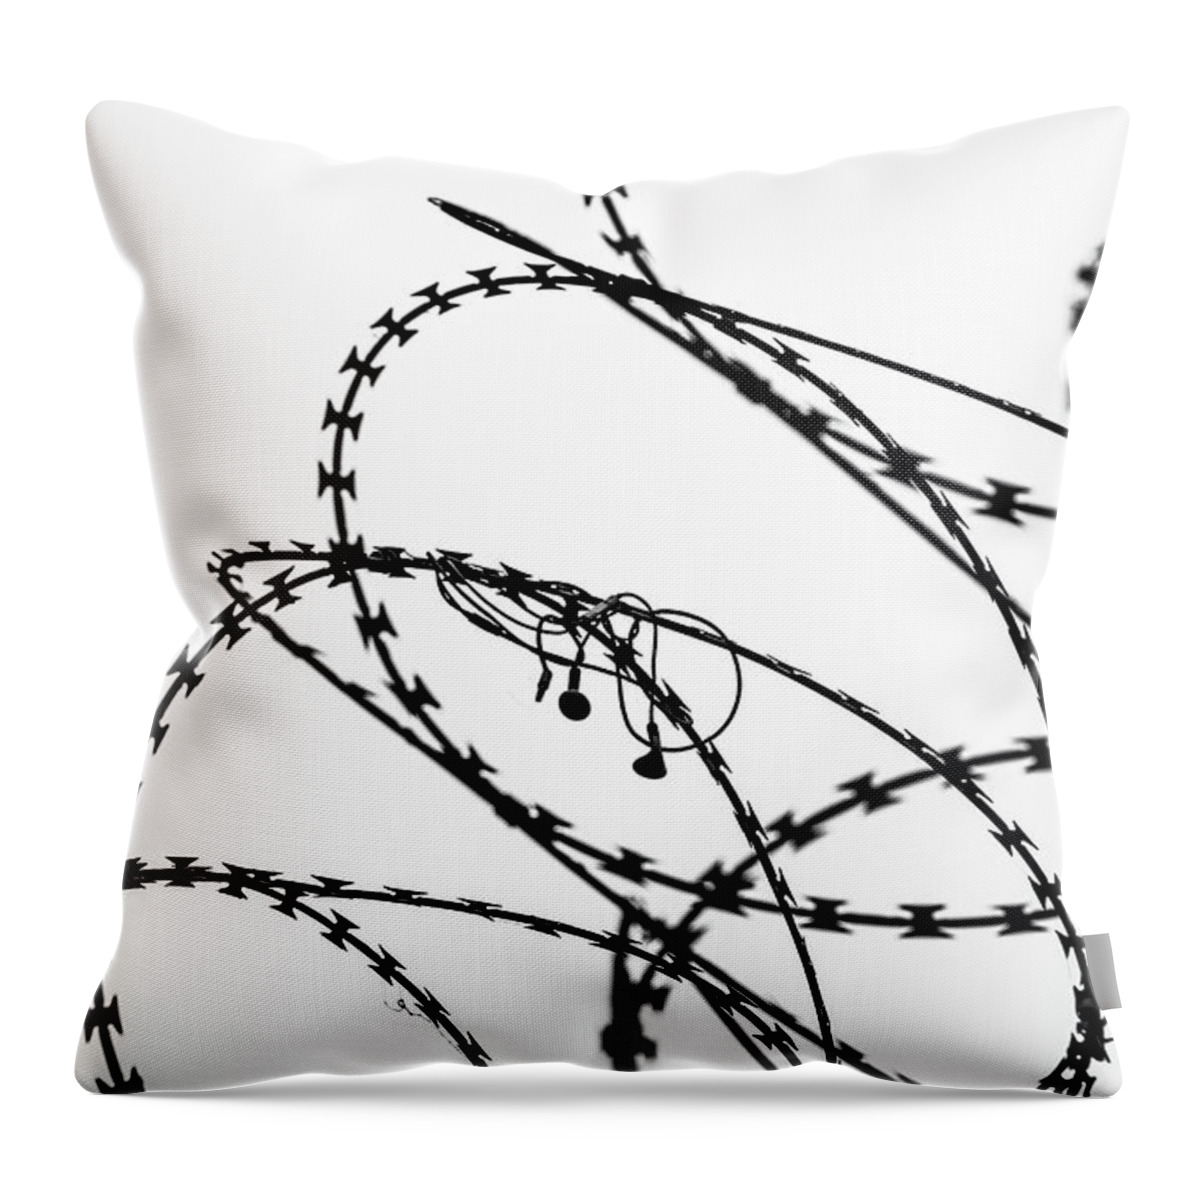 Clare Bambers Throw Pillow featuring the photograph Sharp Sound by Clare Bambers